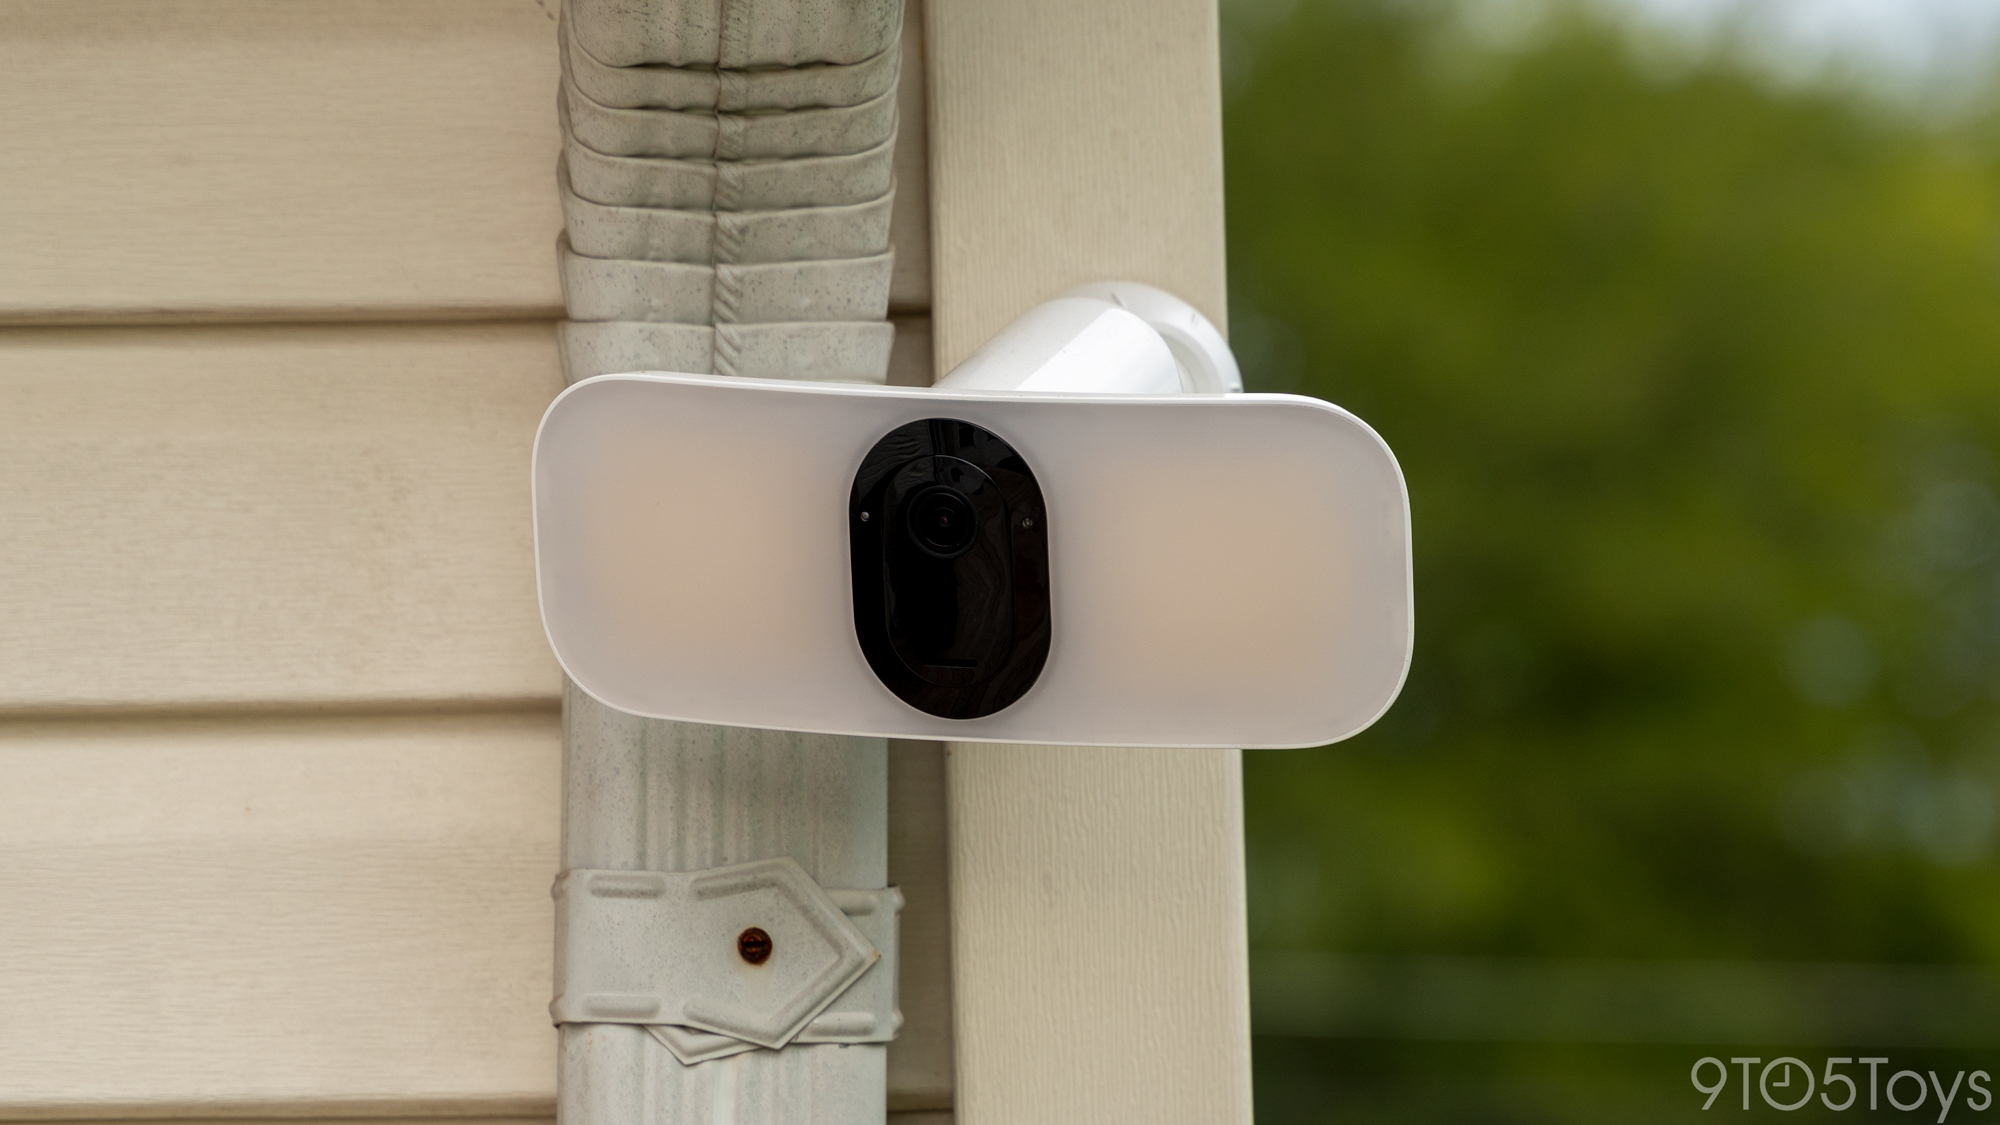 Arlo Pro 3 Floodlight + Doorbell Camera Review 9to5Toys